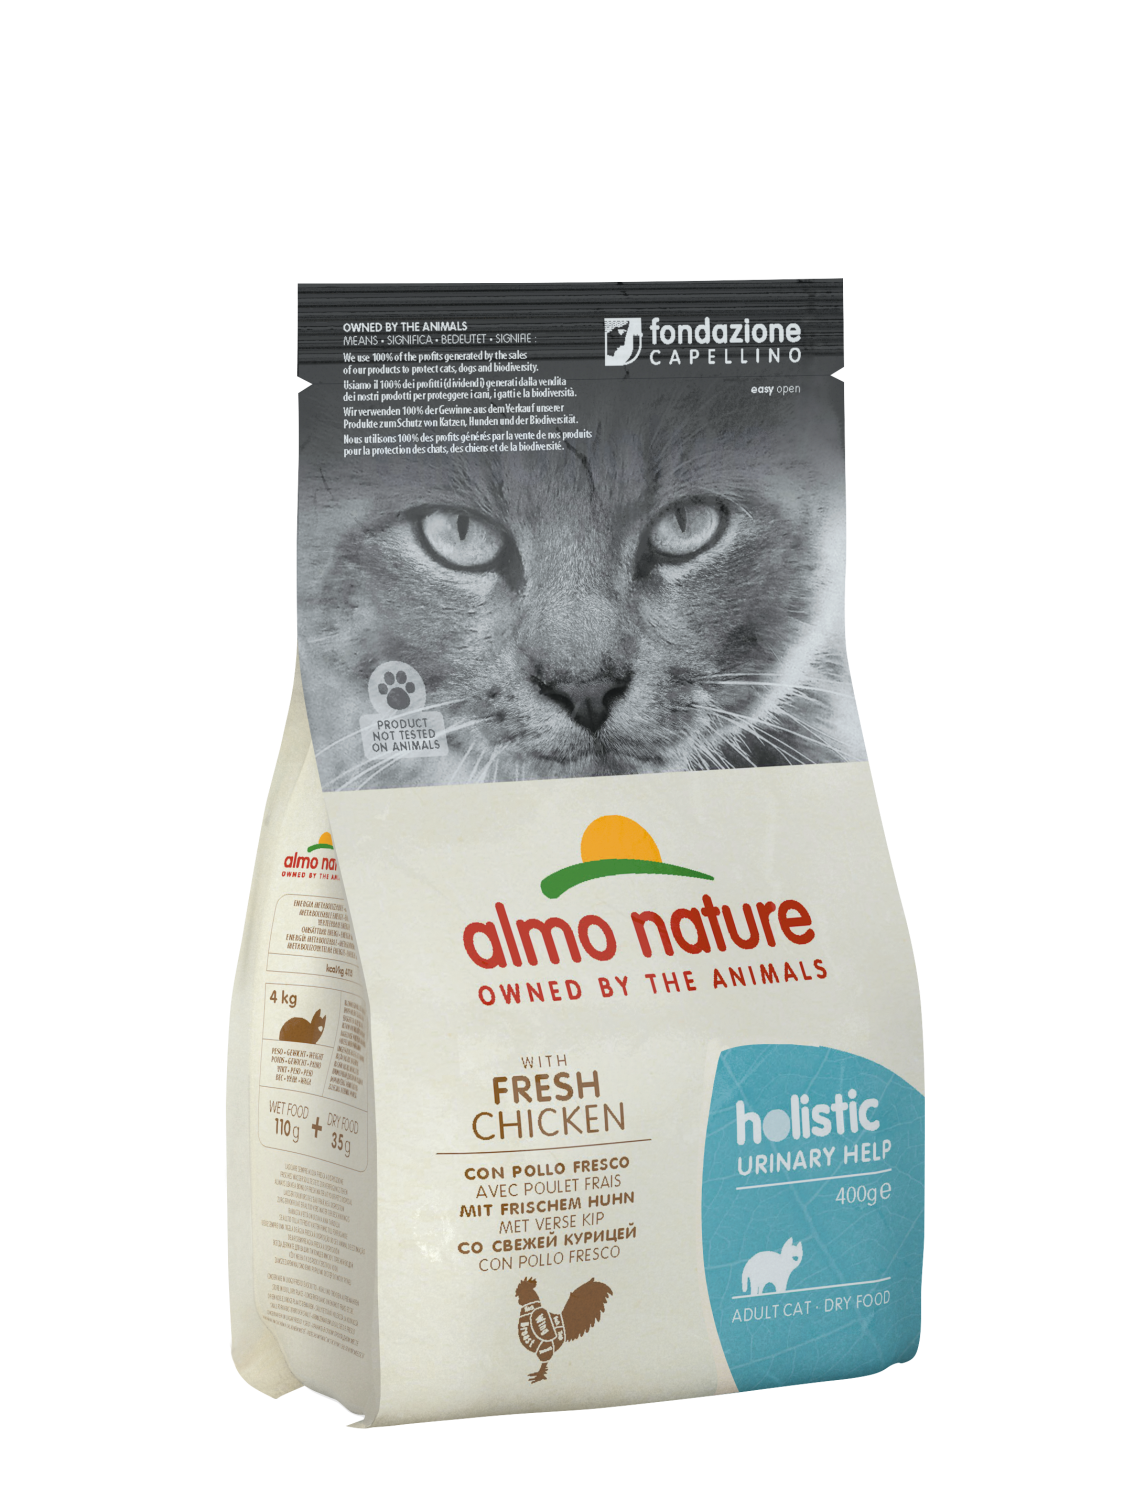 Holistic cat 400g Urinary help with chicken (kylling) Almo Nature (6)